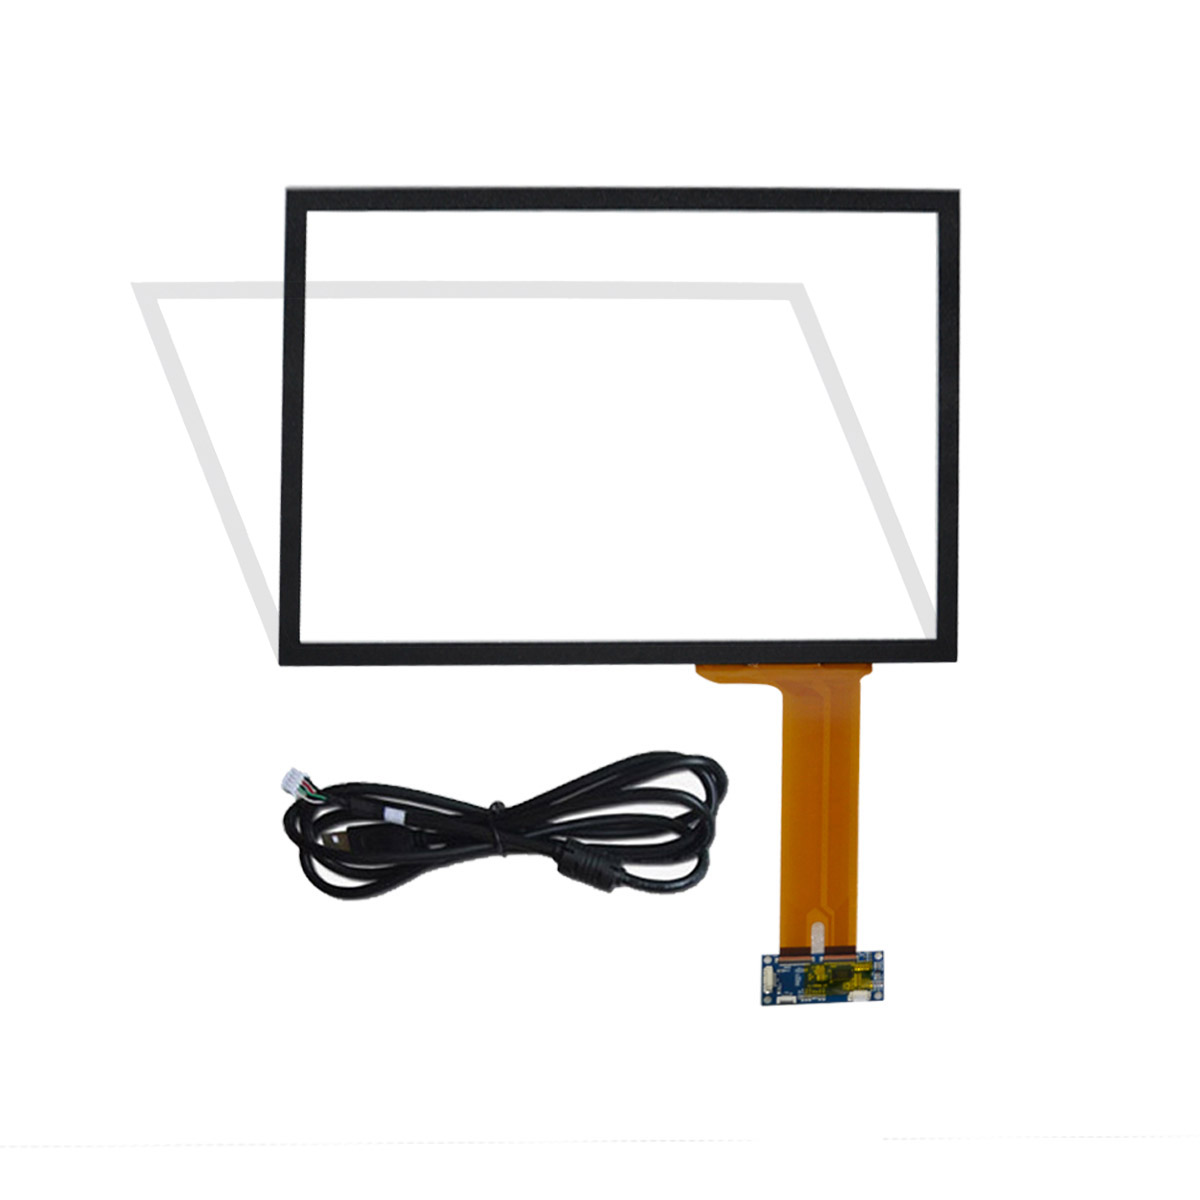 https://www.cjtouch.com/odm-oem-65-inch-high-sensitivity-capacitive-touch-screen-touch-sensor-foil-for-touch-film-digital-product/